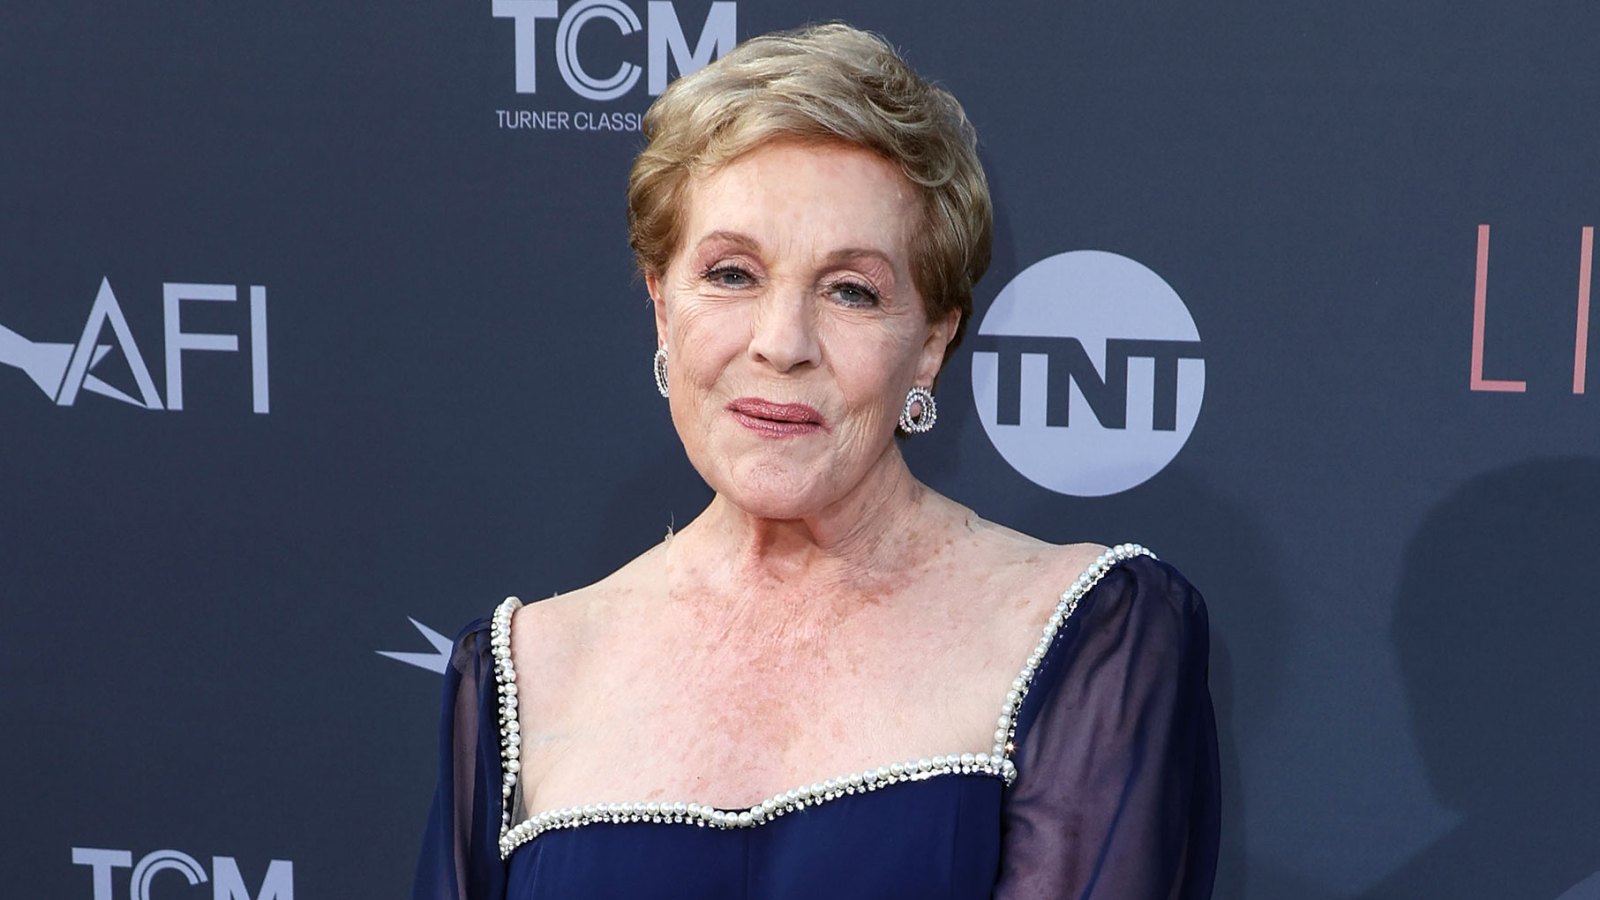 The Sound of Music Stars Who Played the Von Trapp Kids Reunite to Honor Julie Andrews